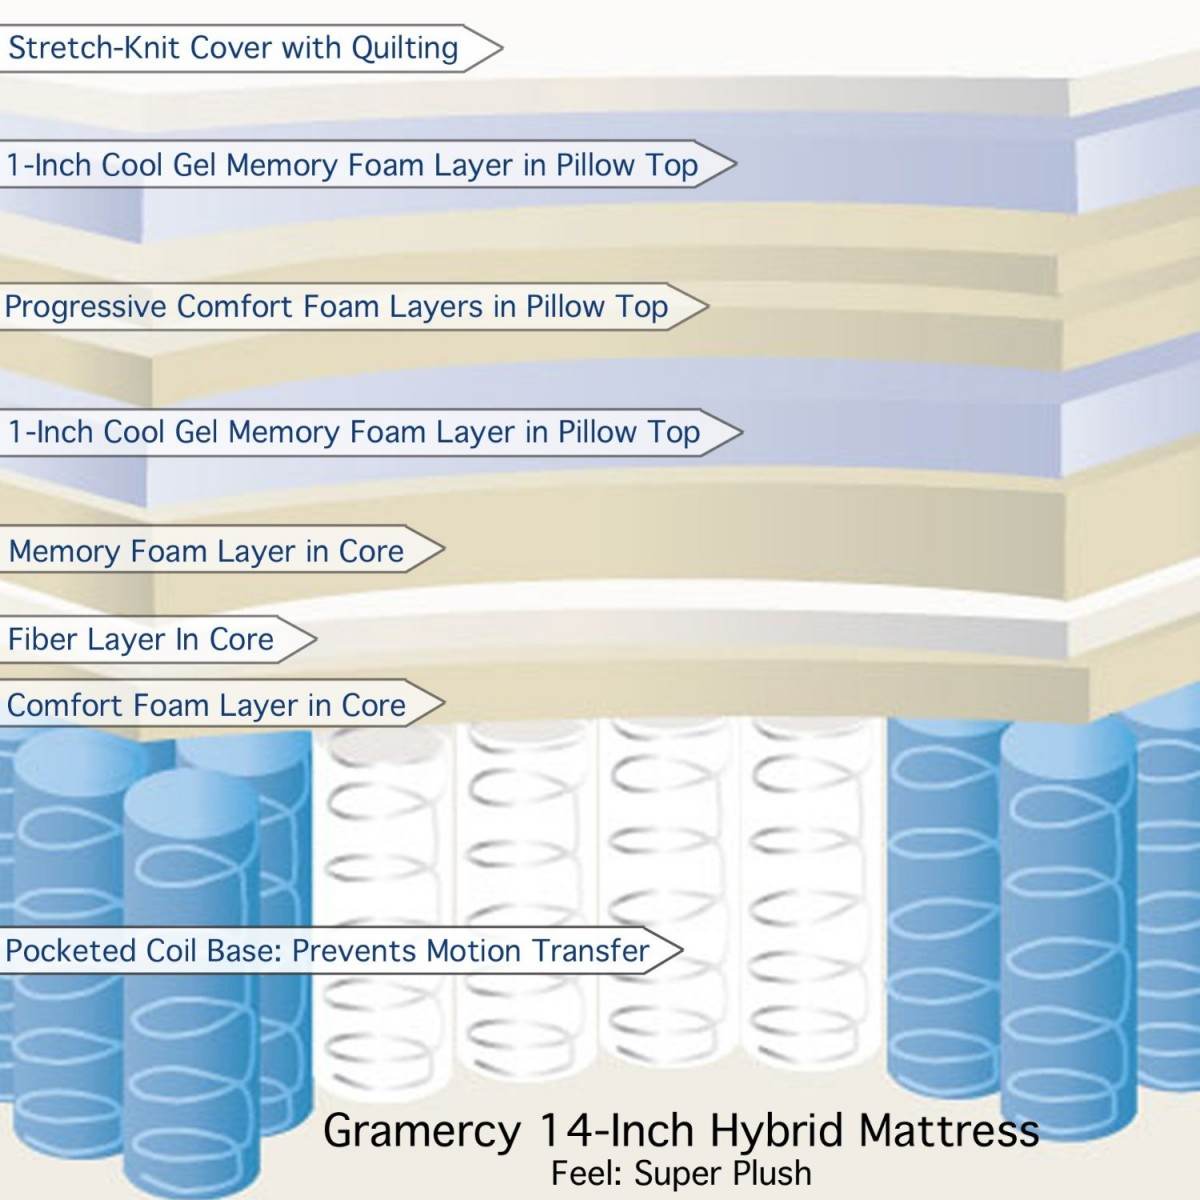 Classic Brands Gramercy 14 Inch Hybrid Cool Gel Memory Foam and Innerspring Mattress Features